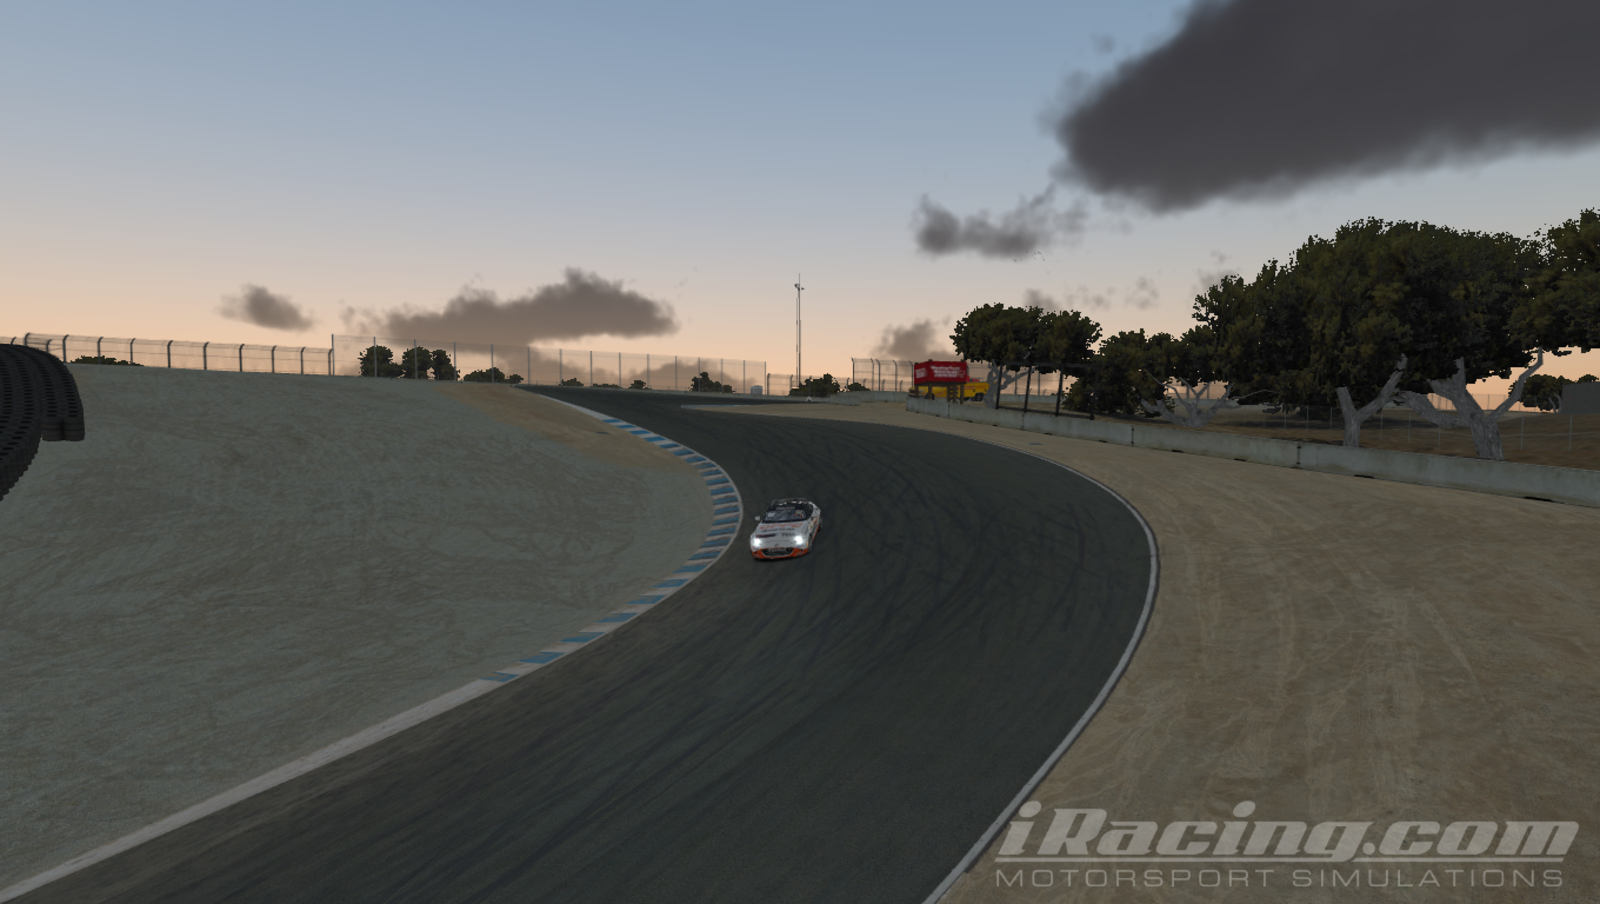 Illustration for article titled An Evening at Laguna Seca - 2018 Oppositelock Miata Championship - Round 3 Preview